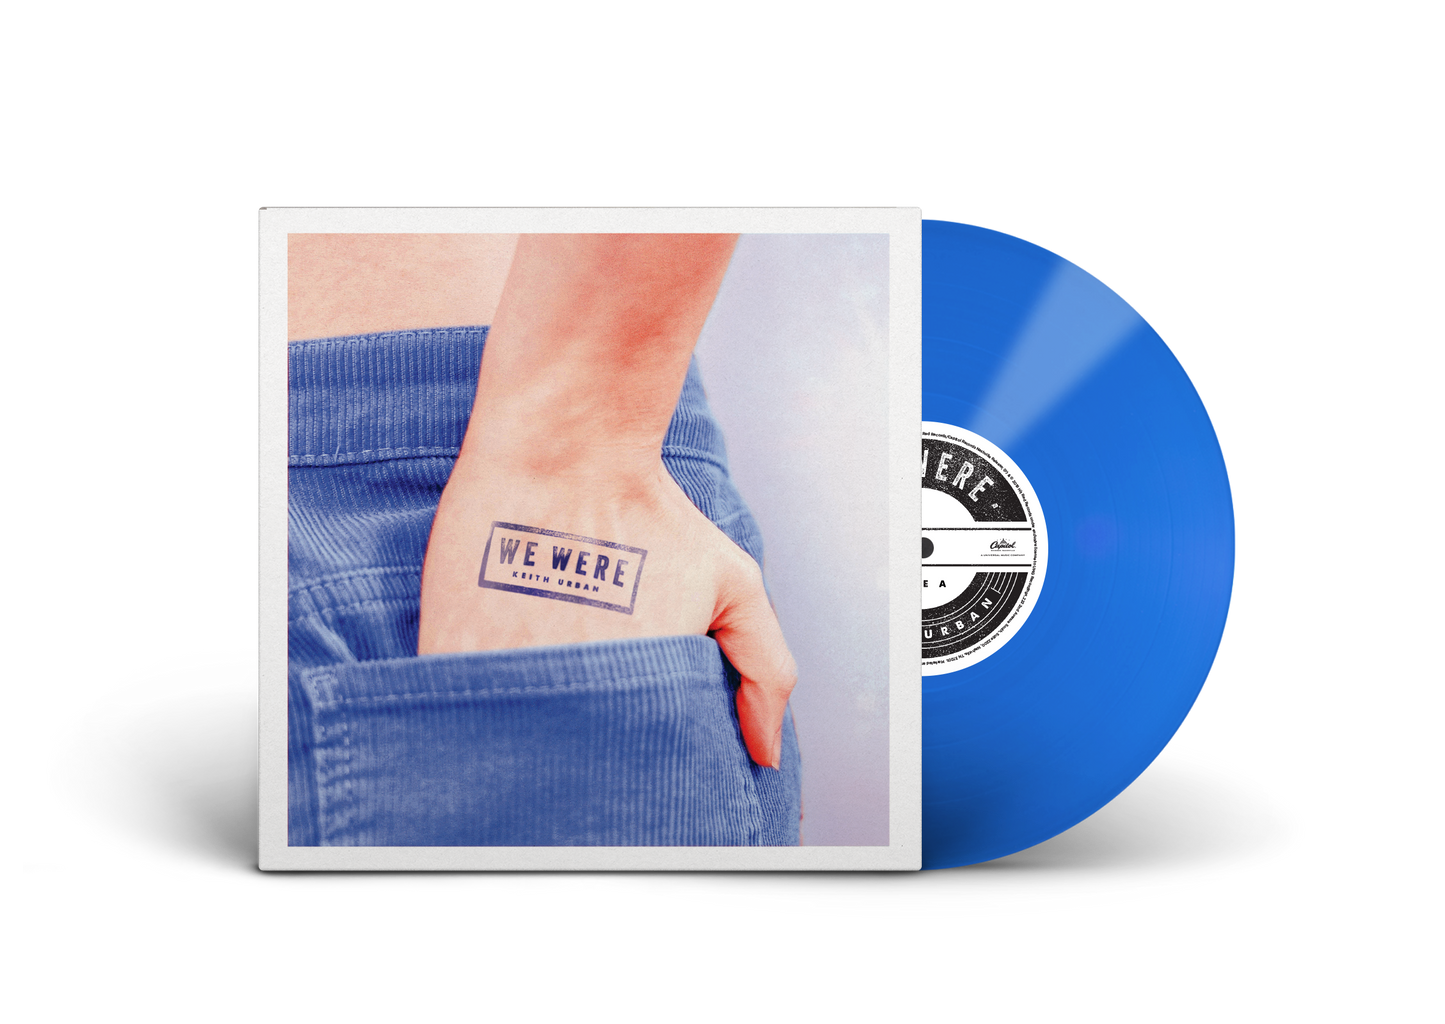 "We Were" Blue Cover with Blue 7" Vinyl